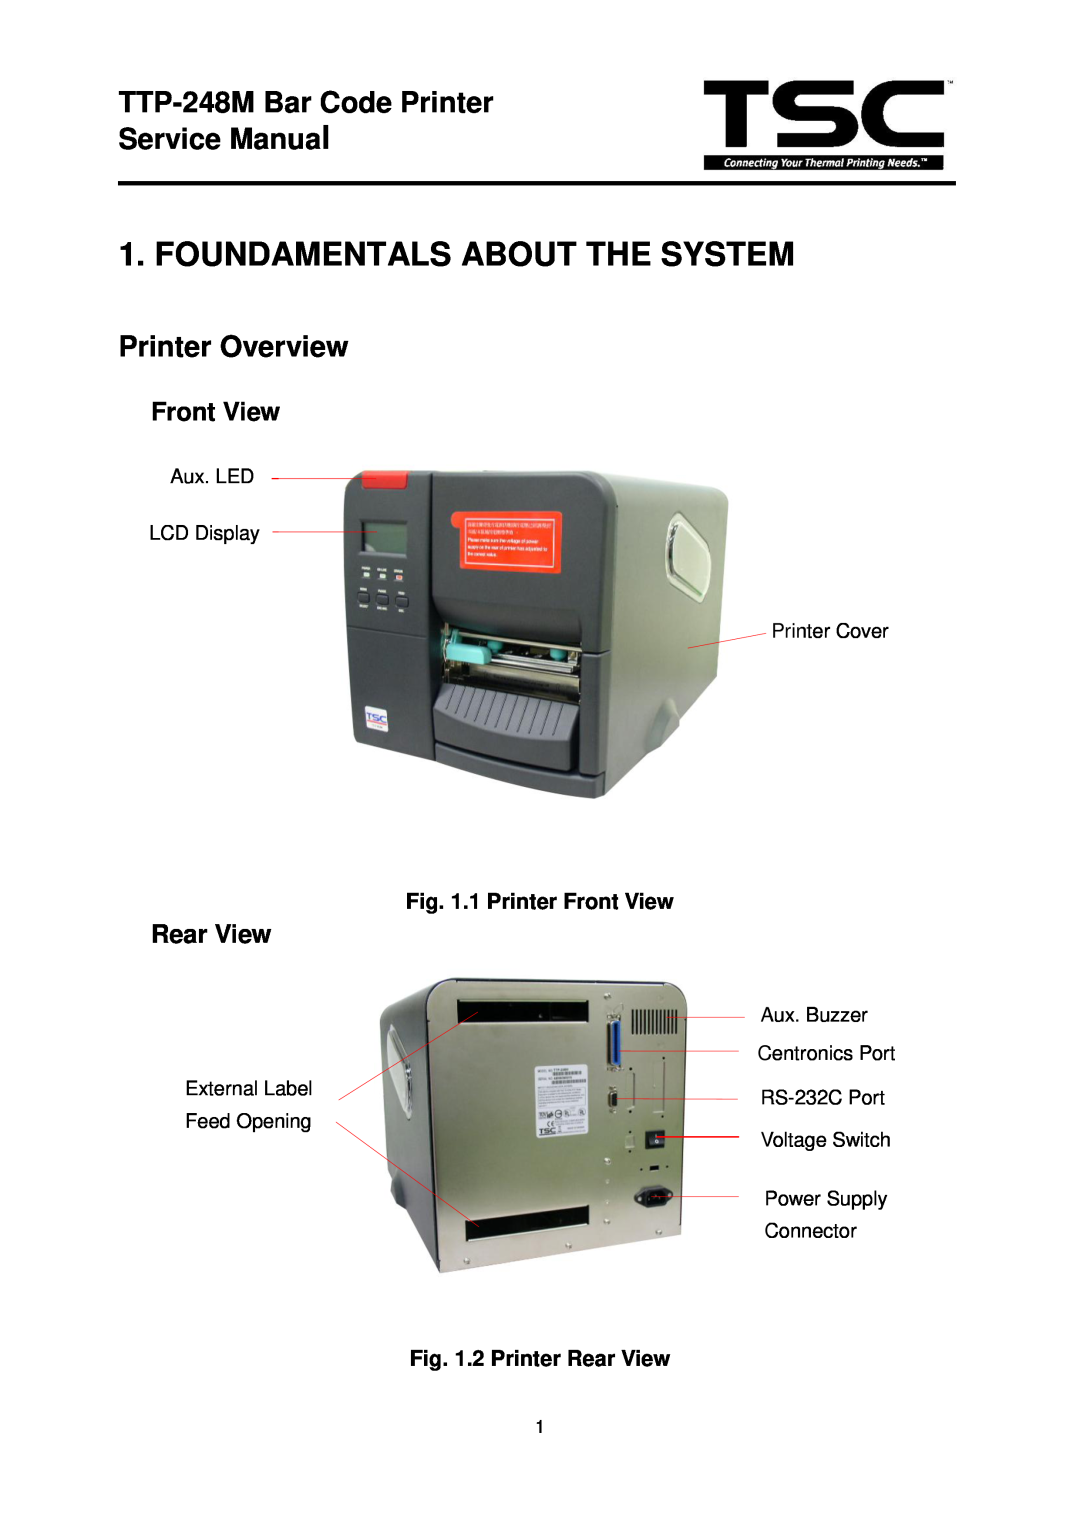 The Speaker Company TTP 248M Foundamentals About The System, TTP-248M Bar Code Printer Service Manual, Printer Overview 